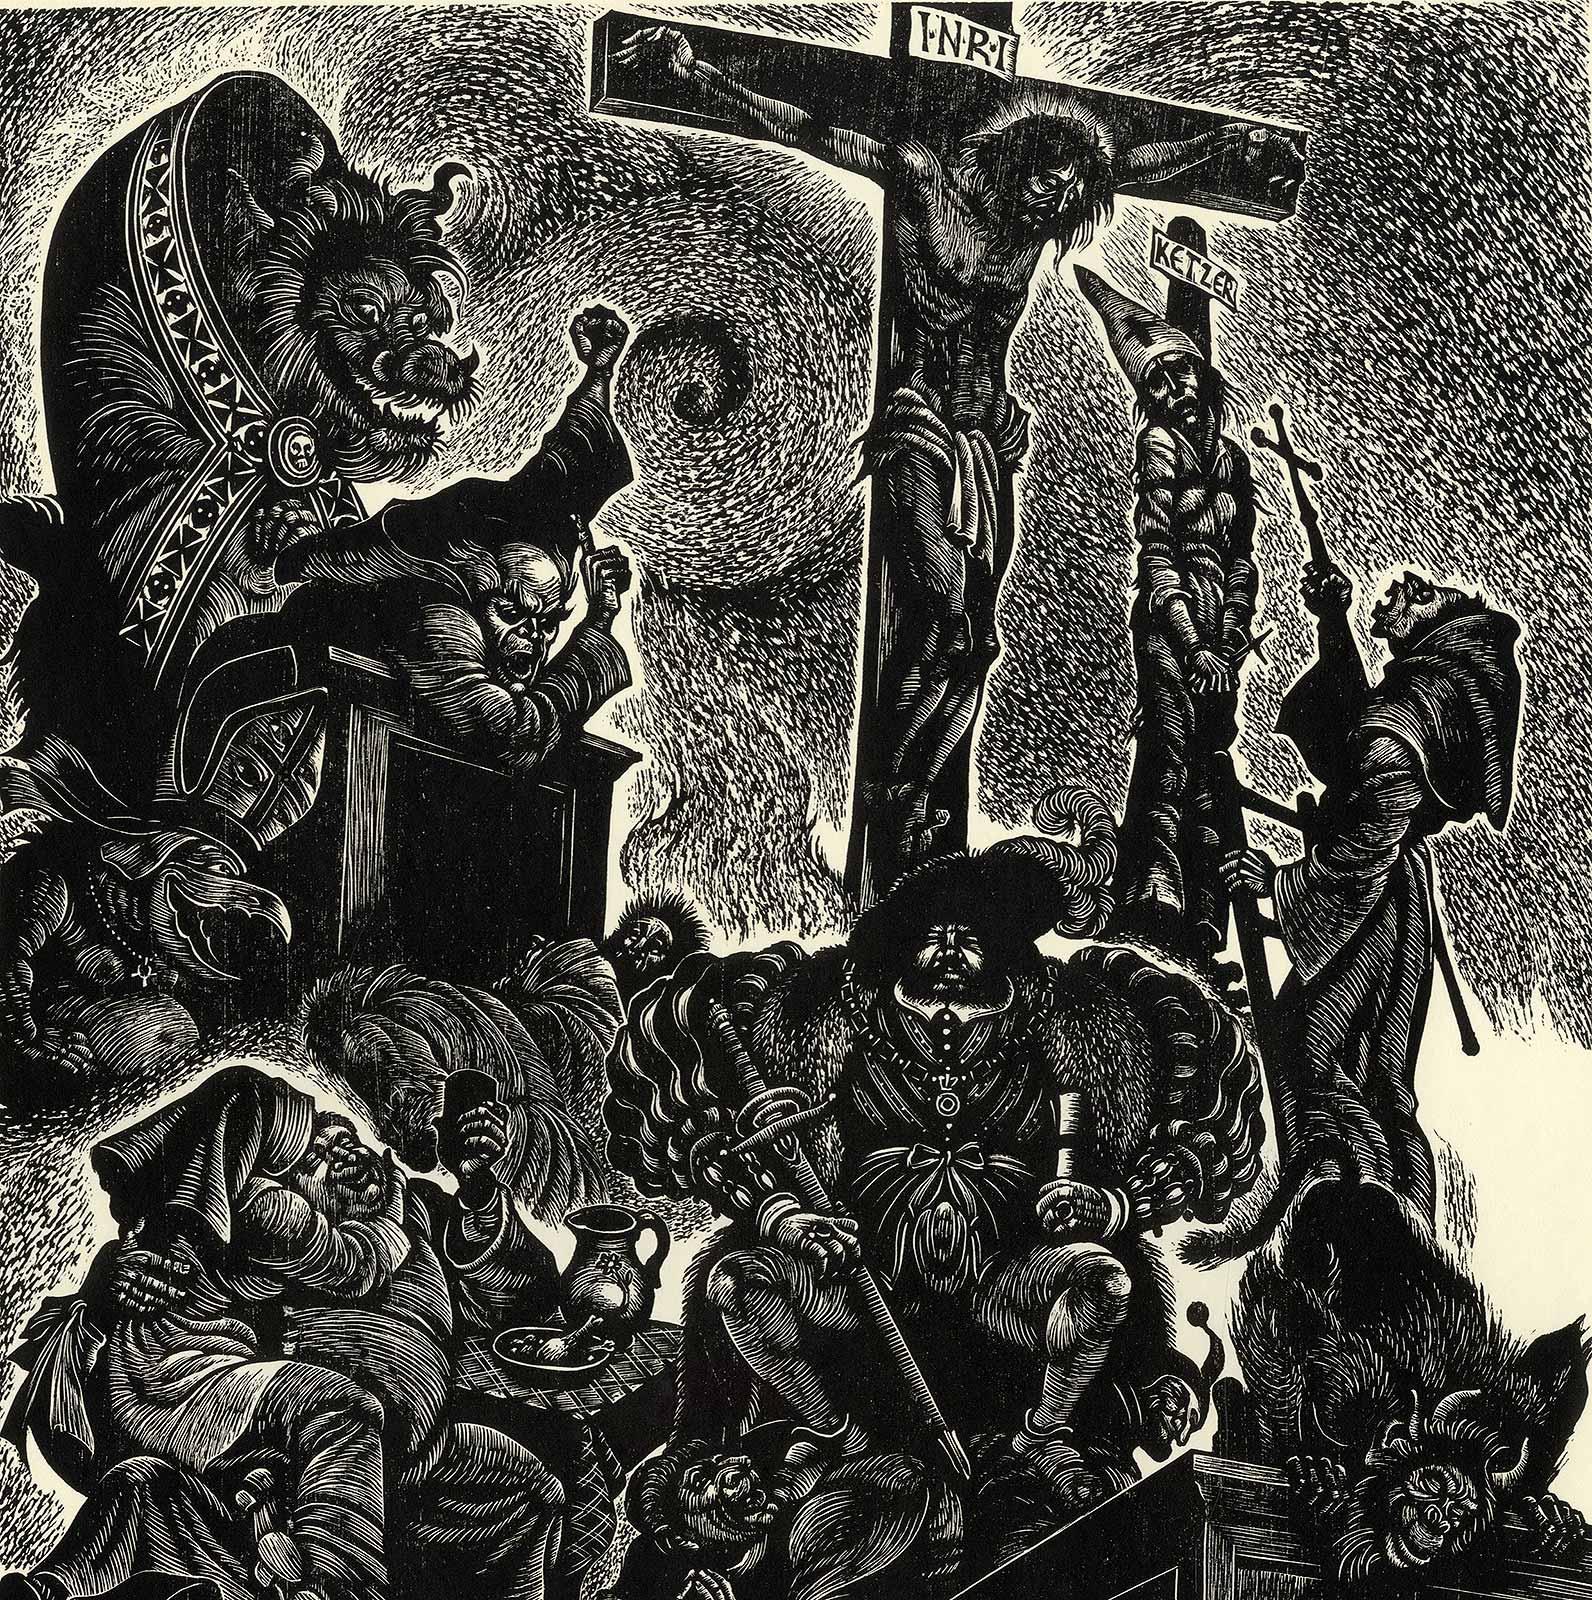 Follies of the Monks  - Print by Fritz Eichenberg.